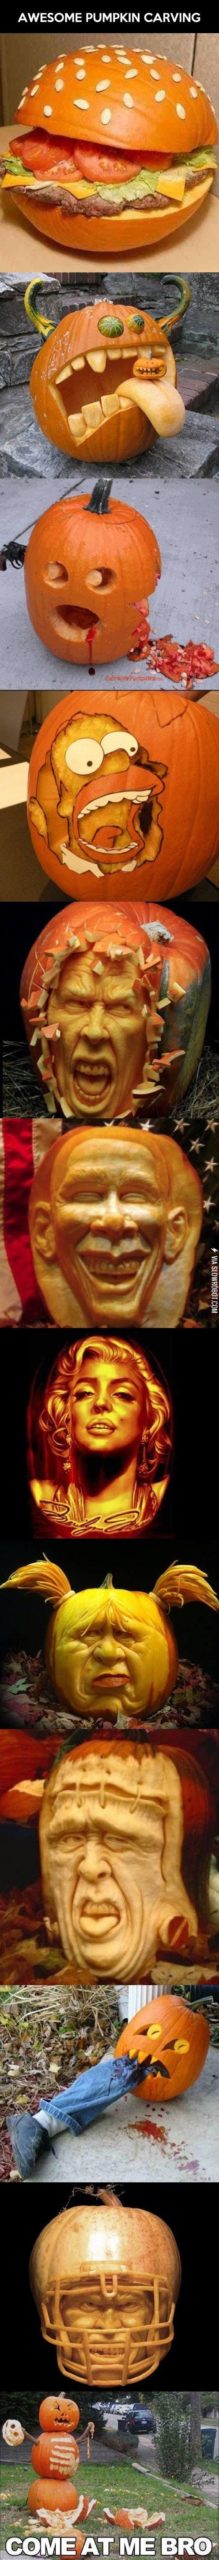 Awesome+pumpkin+carvings